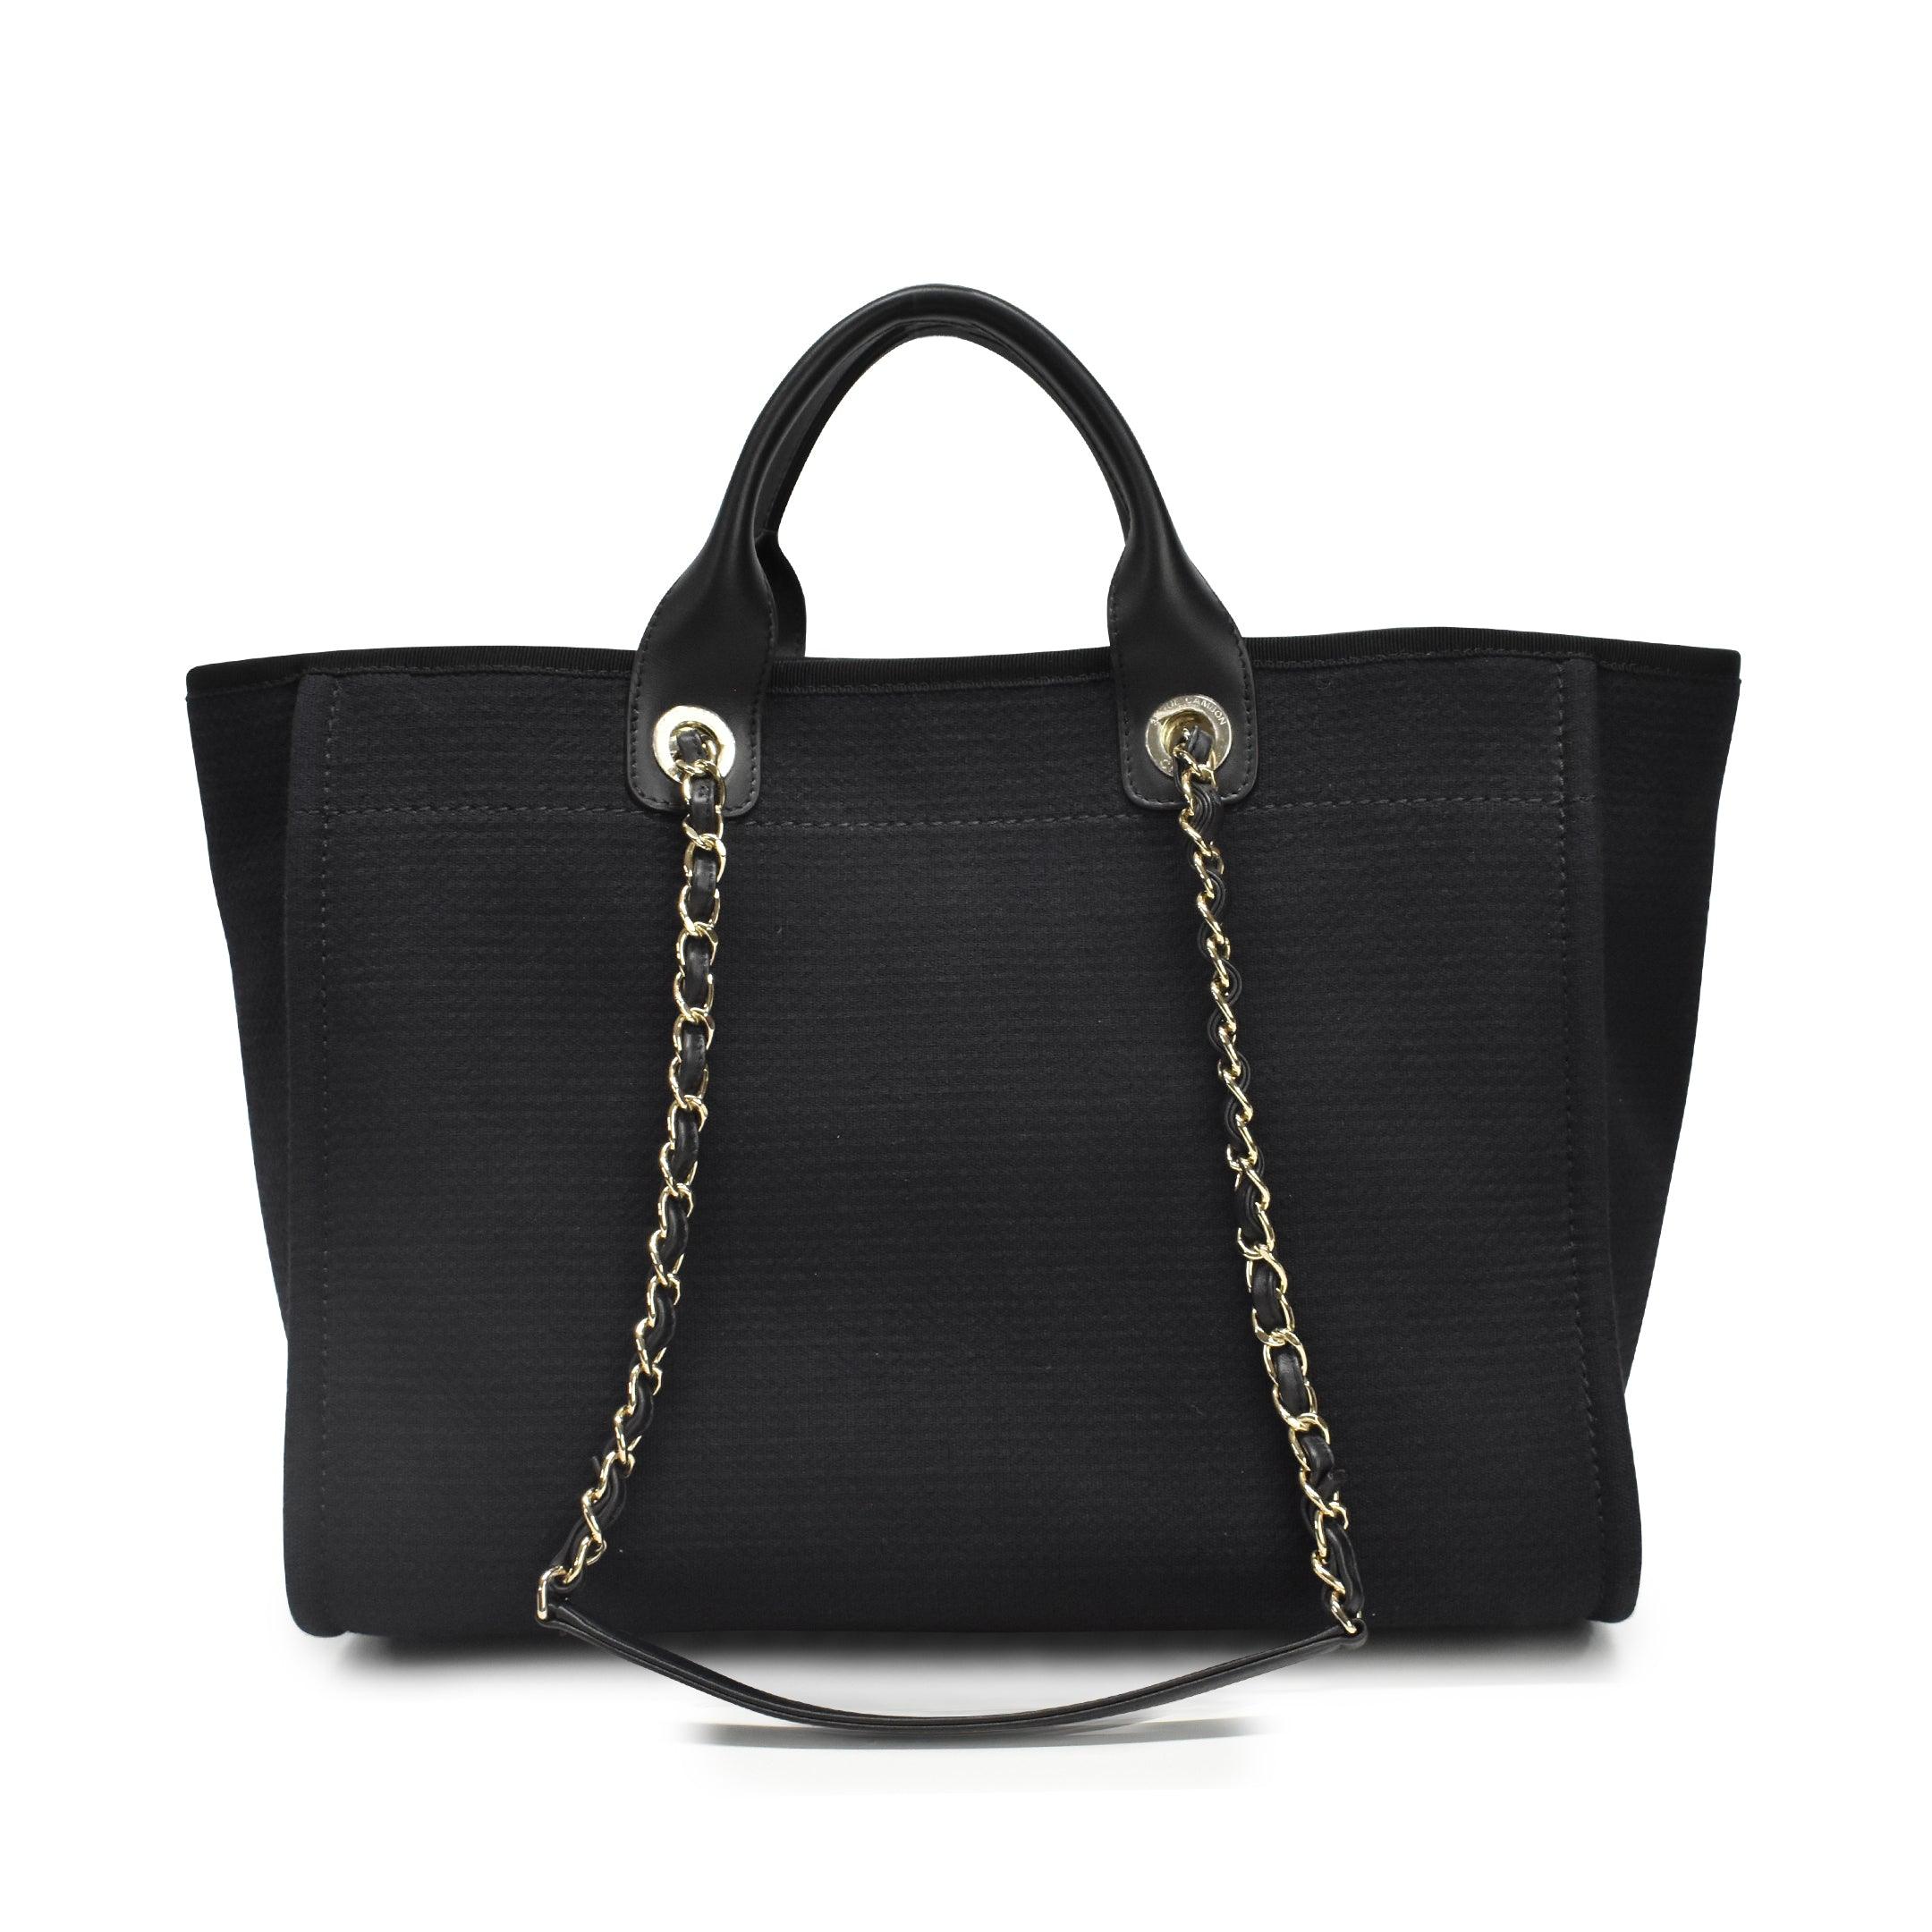 Chanel 'Deauville' Tote - Fashionably Yours